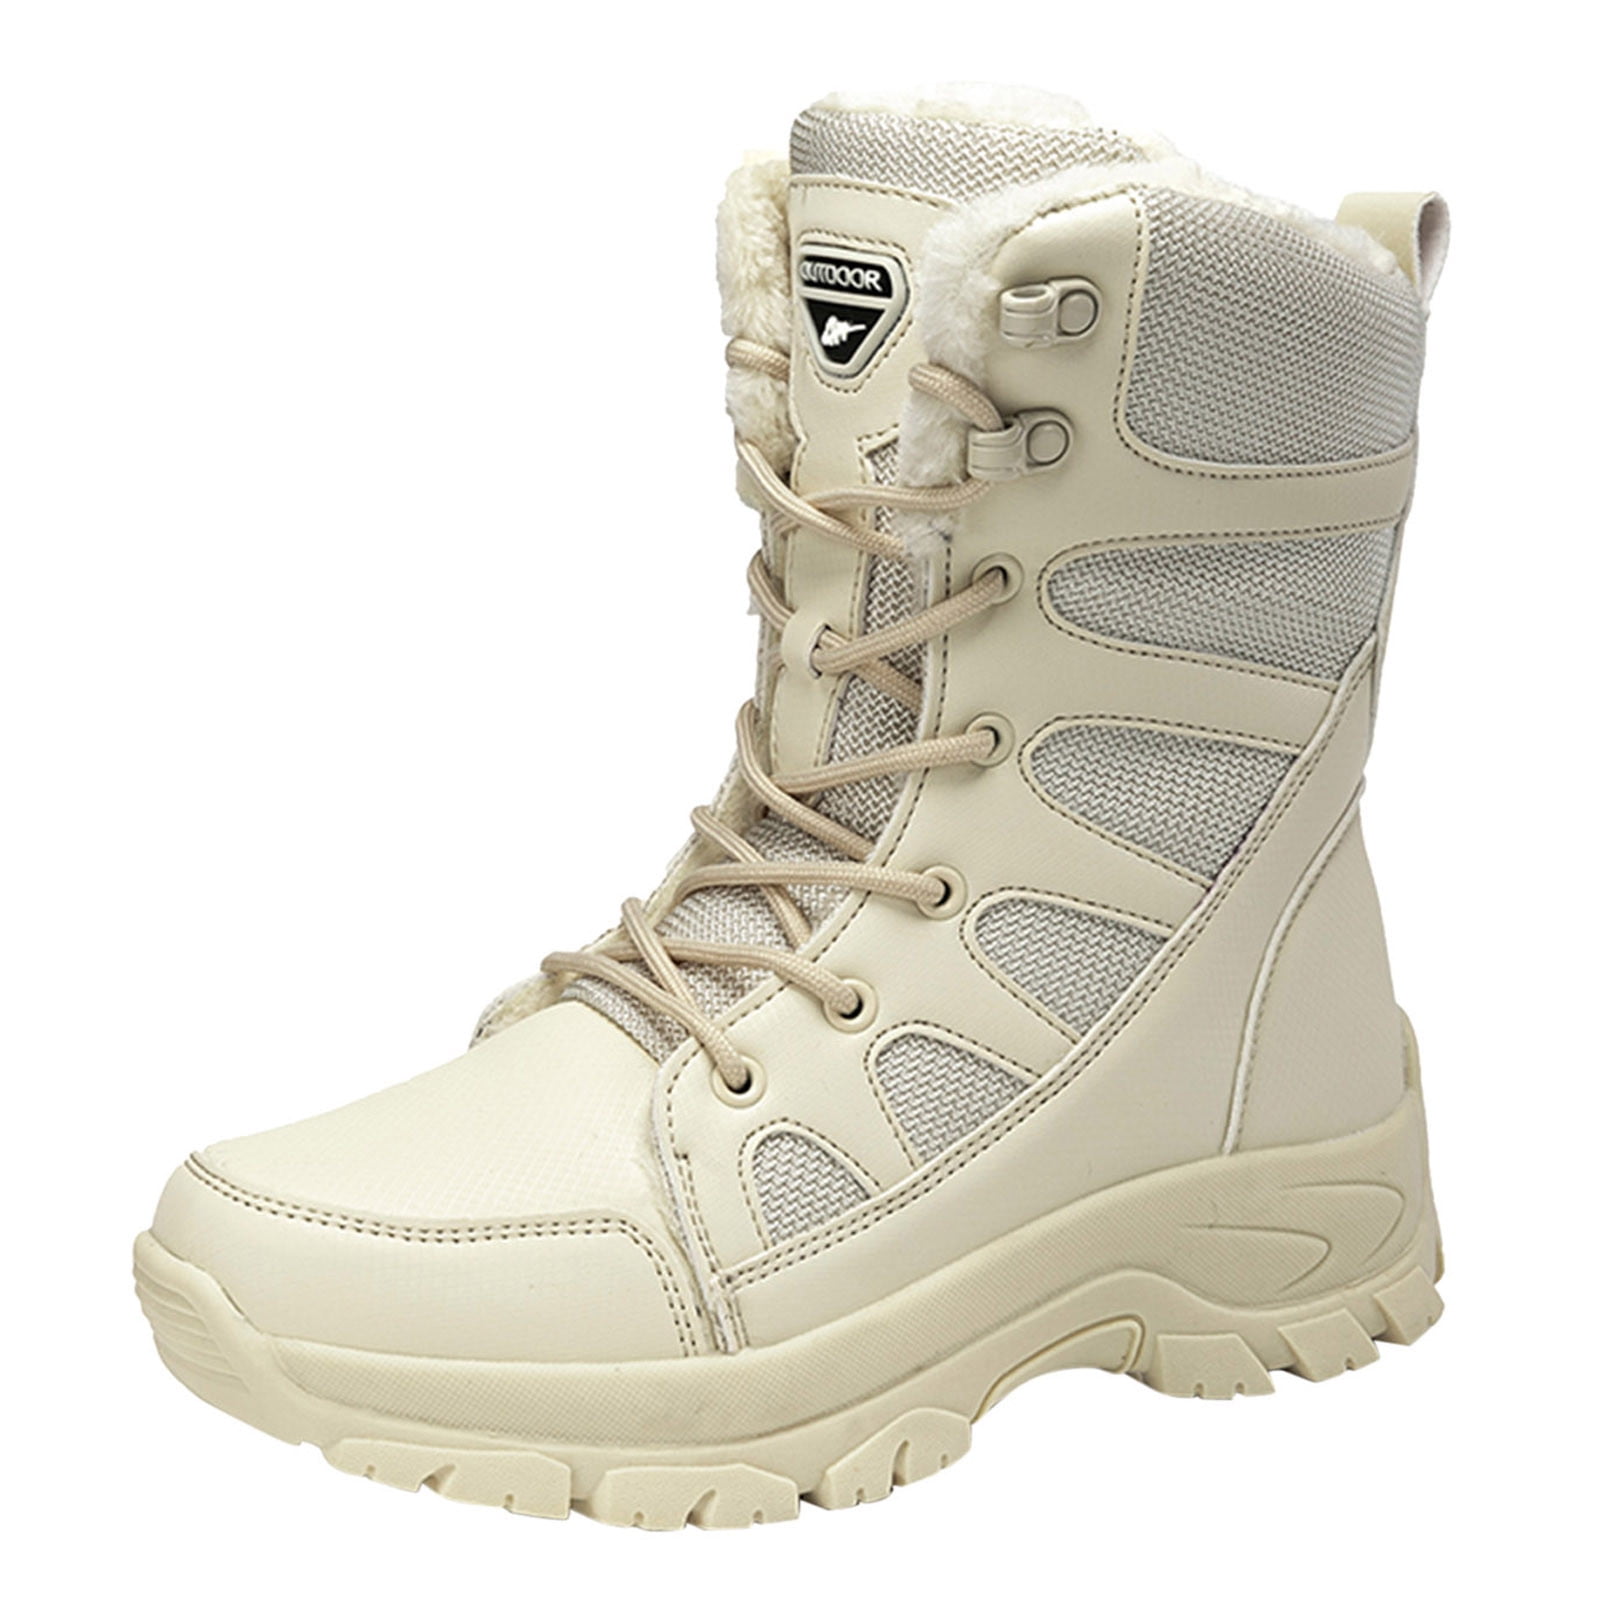 nsendm Female Shoes Adult Tall Snow Boots for Women Wide Calf Proof Flat  Lace Up Keep Warm Snow Boots Comfortable Mid Cute Fall Boots for Teens  Beige